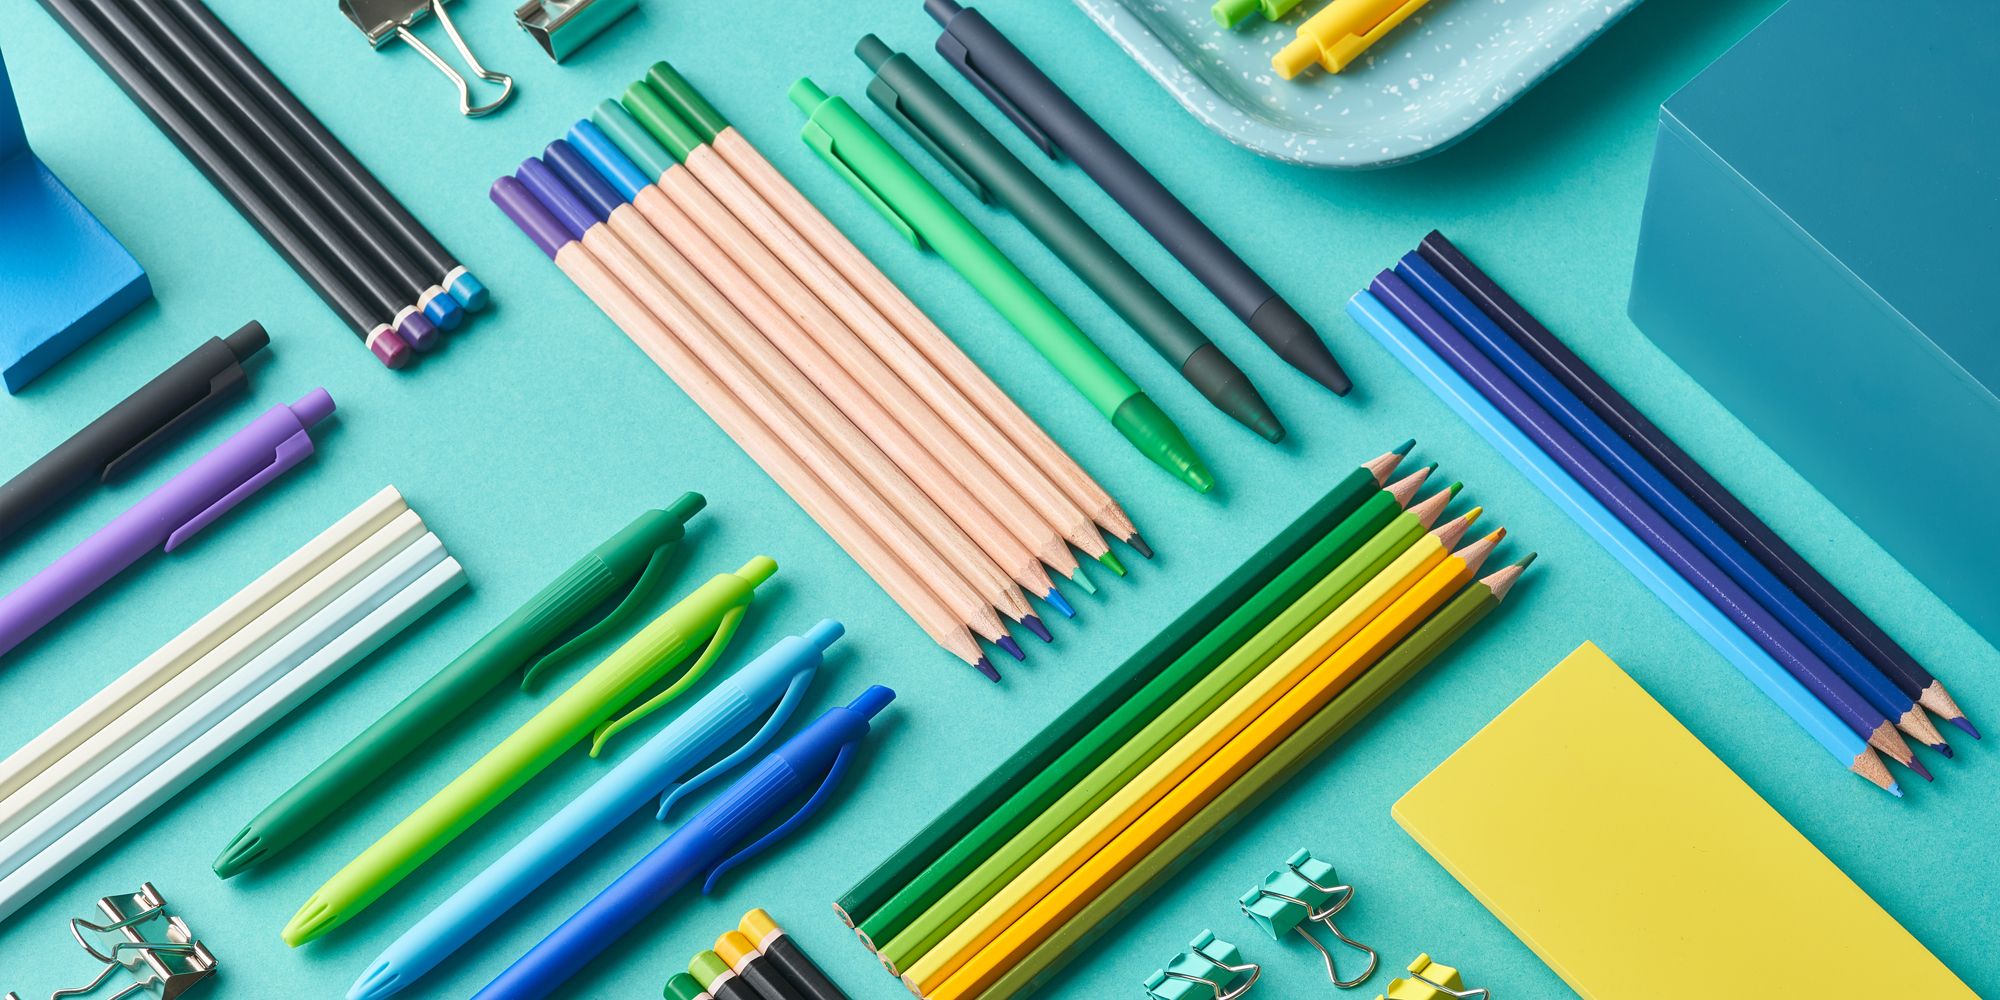 50 School Supplies That Will Set Your Kids Up for Their Most Productive School Year